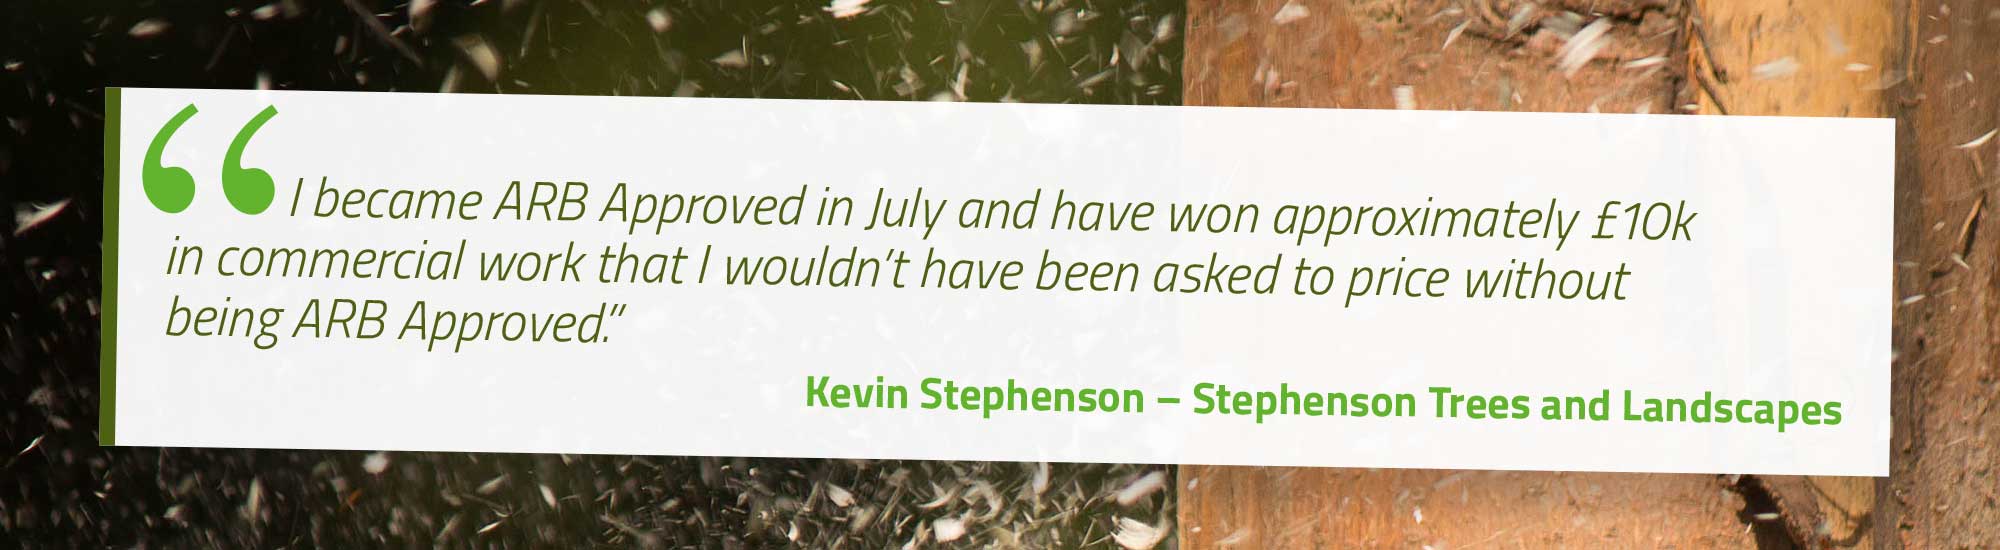 I became ARB Approved in July and have won approximately £10k in commercial work that I wouldn’t have been asked to price without being ARB Approved. Kevin Stephenson – Stephenson Trees and Landscapes